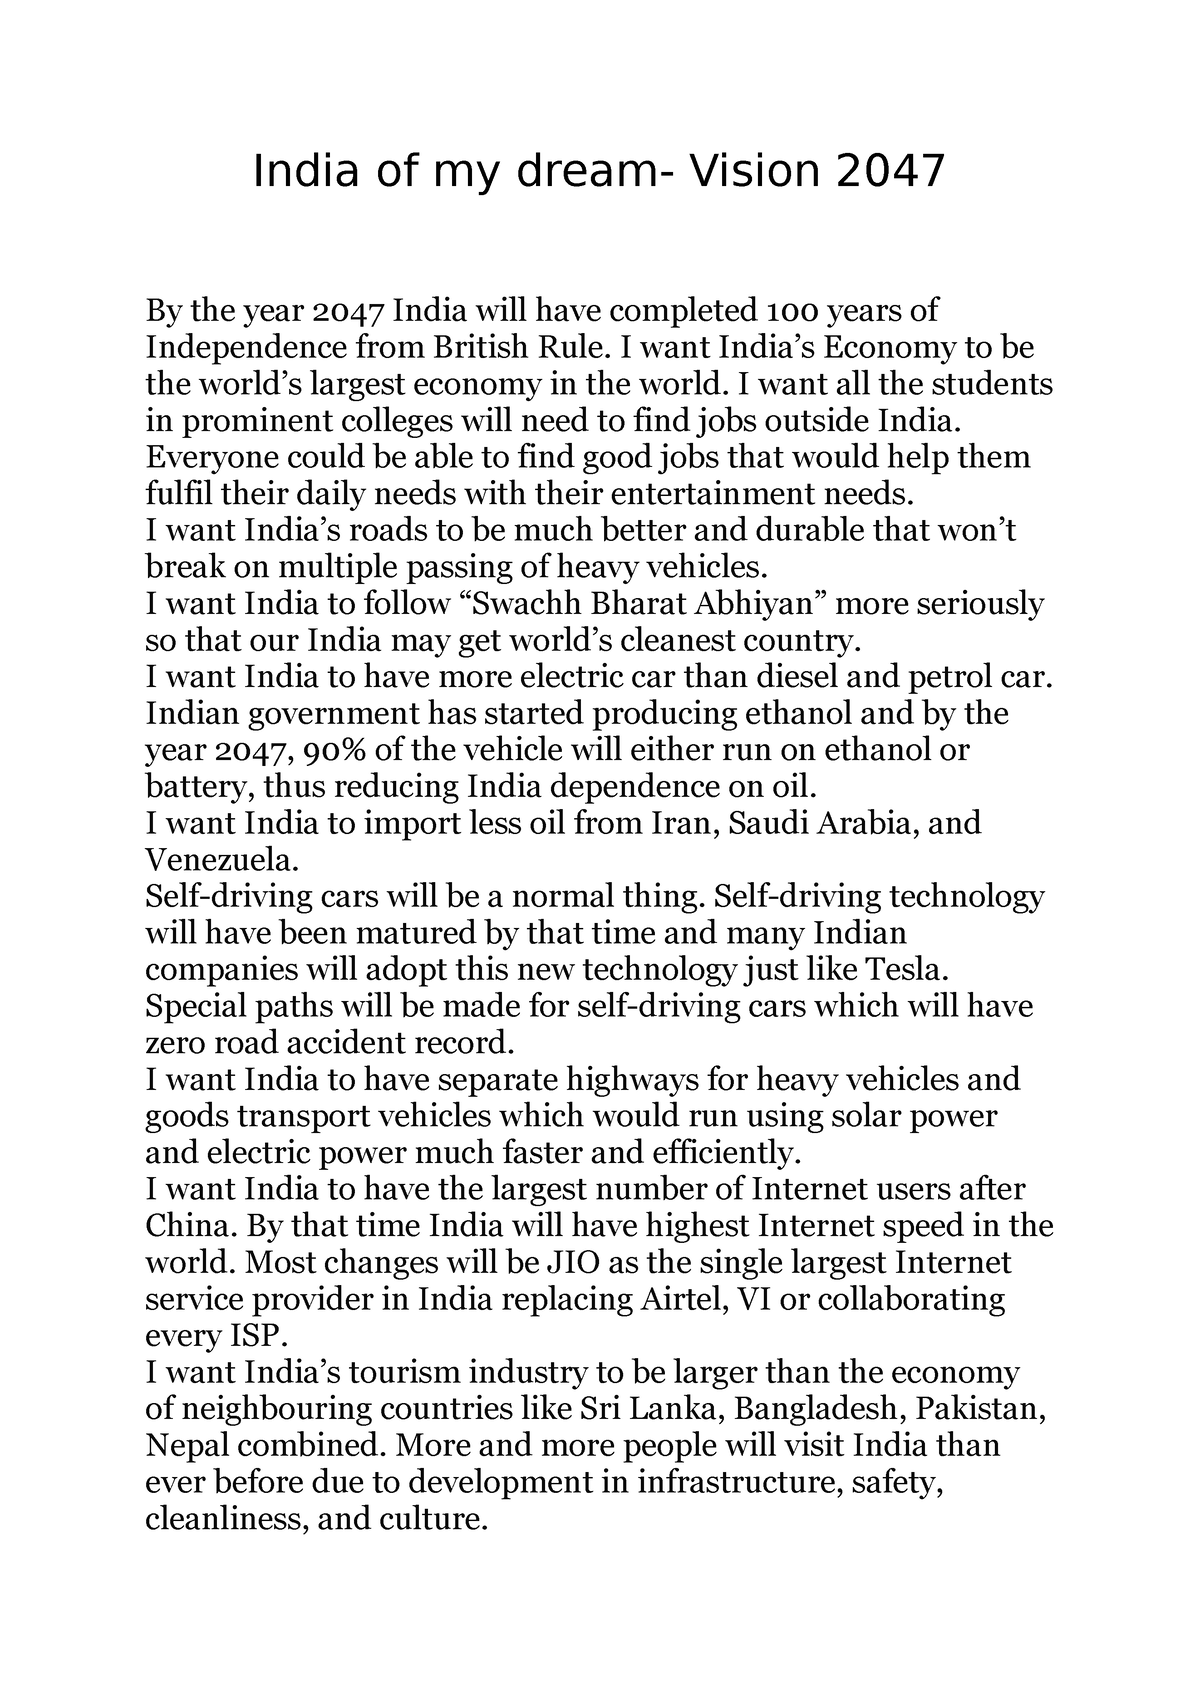 essay on my vision of india 2020